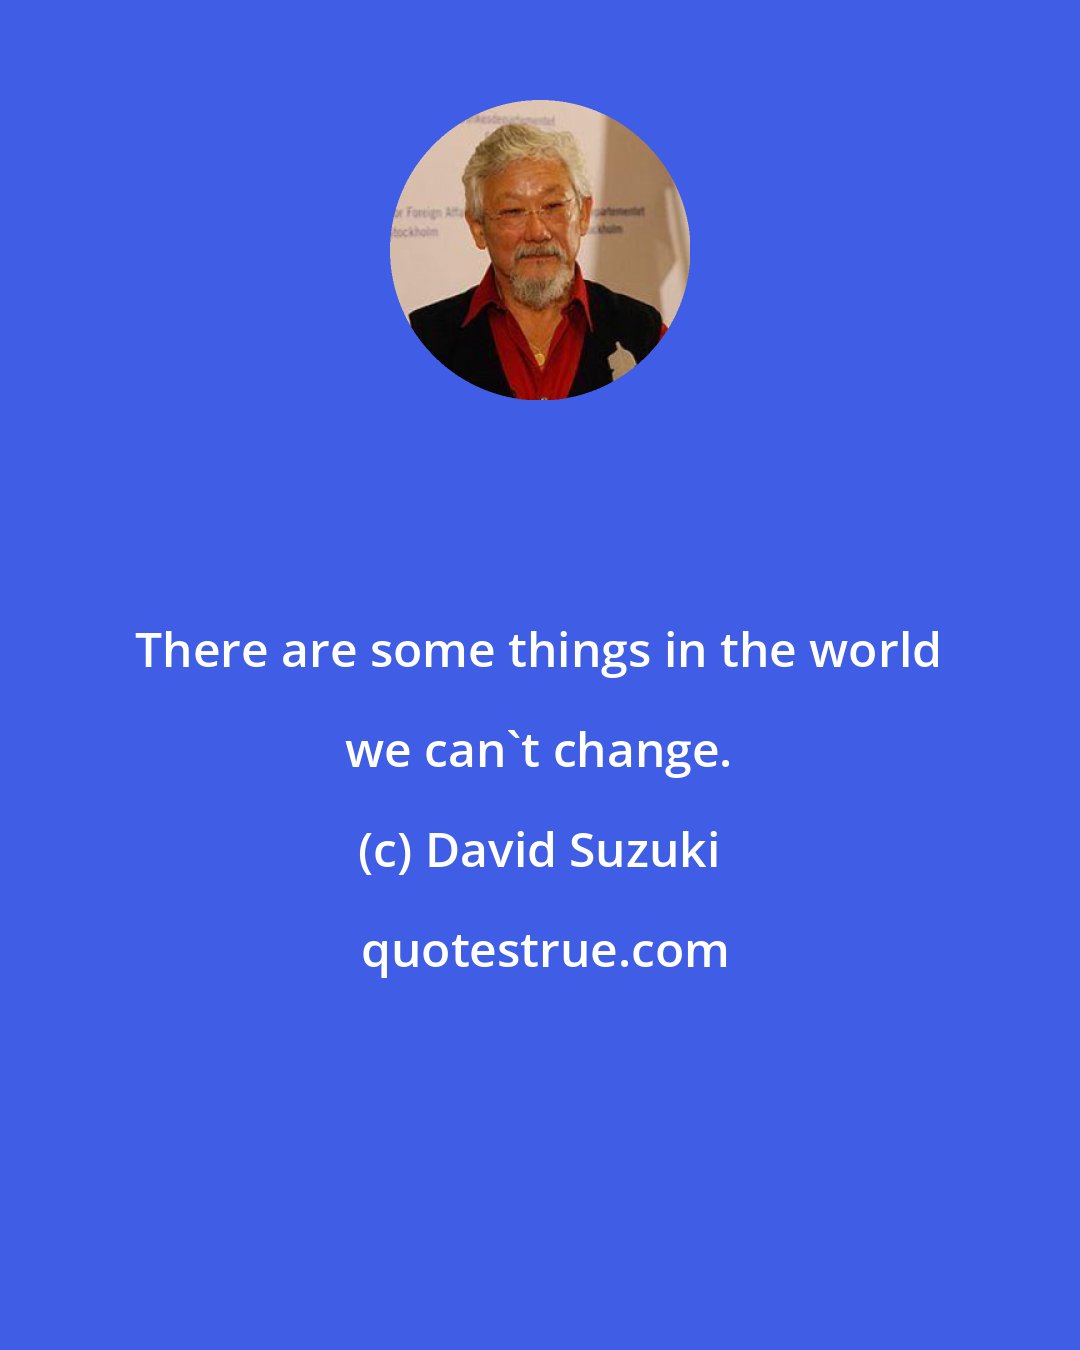 David Suzuki: There are some things in the world we can't change.